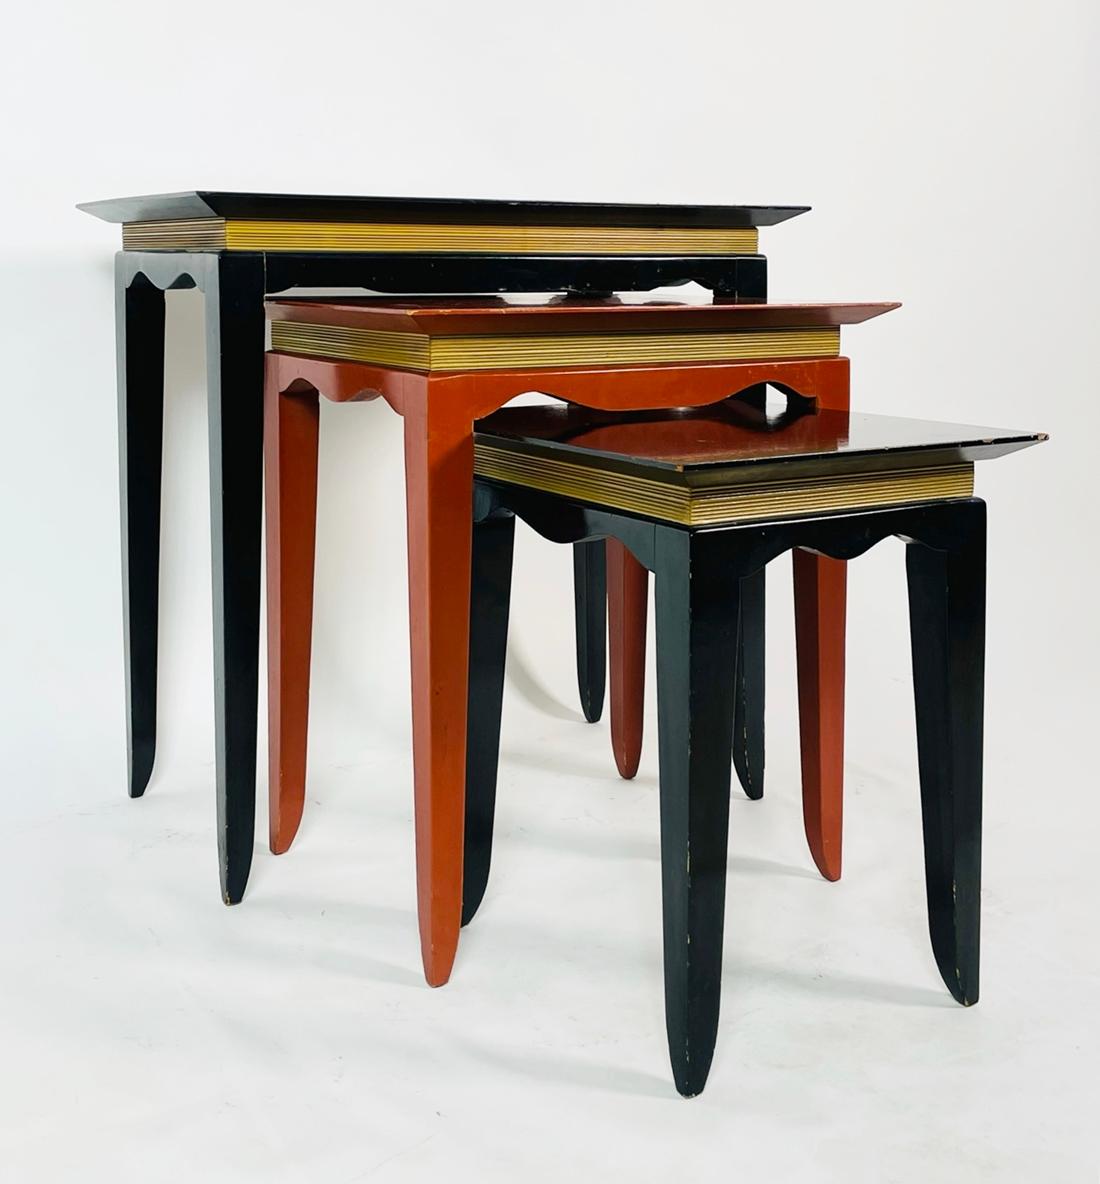 Designer nesting tables custom made in the 1960s.
The tables have beautiful lines and could be used as a set or separate to be used in different areas of a house.

Measurements: 
Large black table:
26 inches wide x 16 inches deep x 25.25 inches